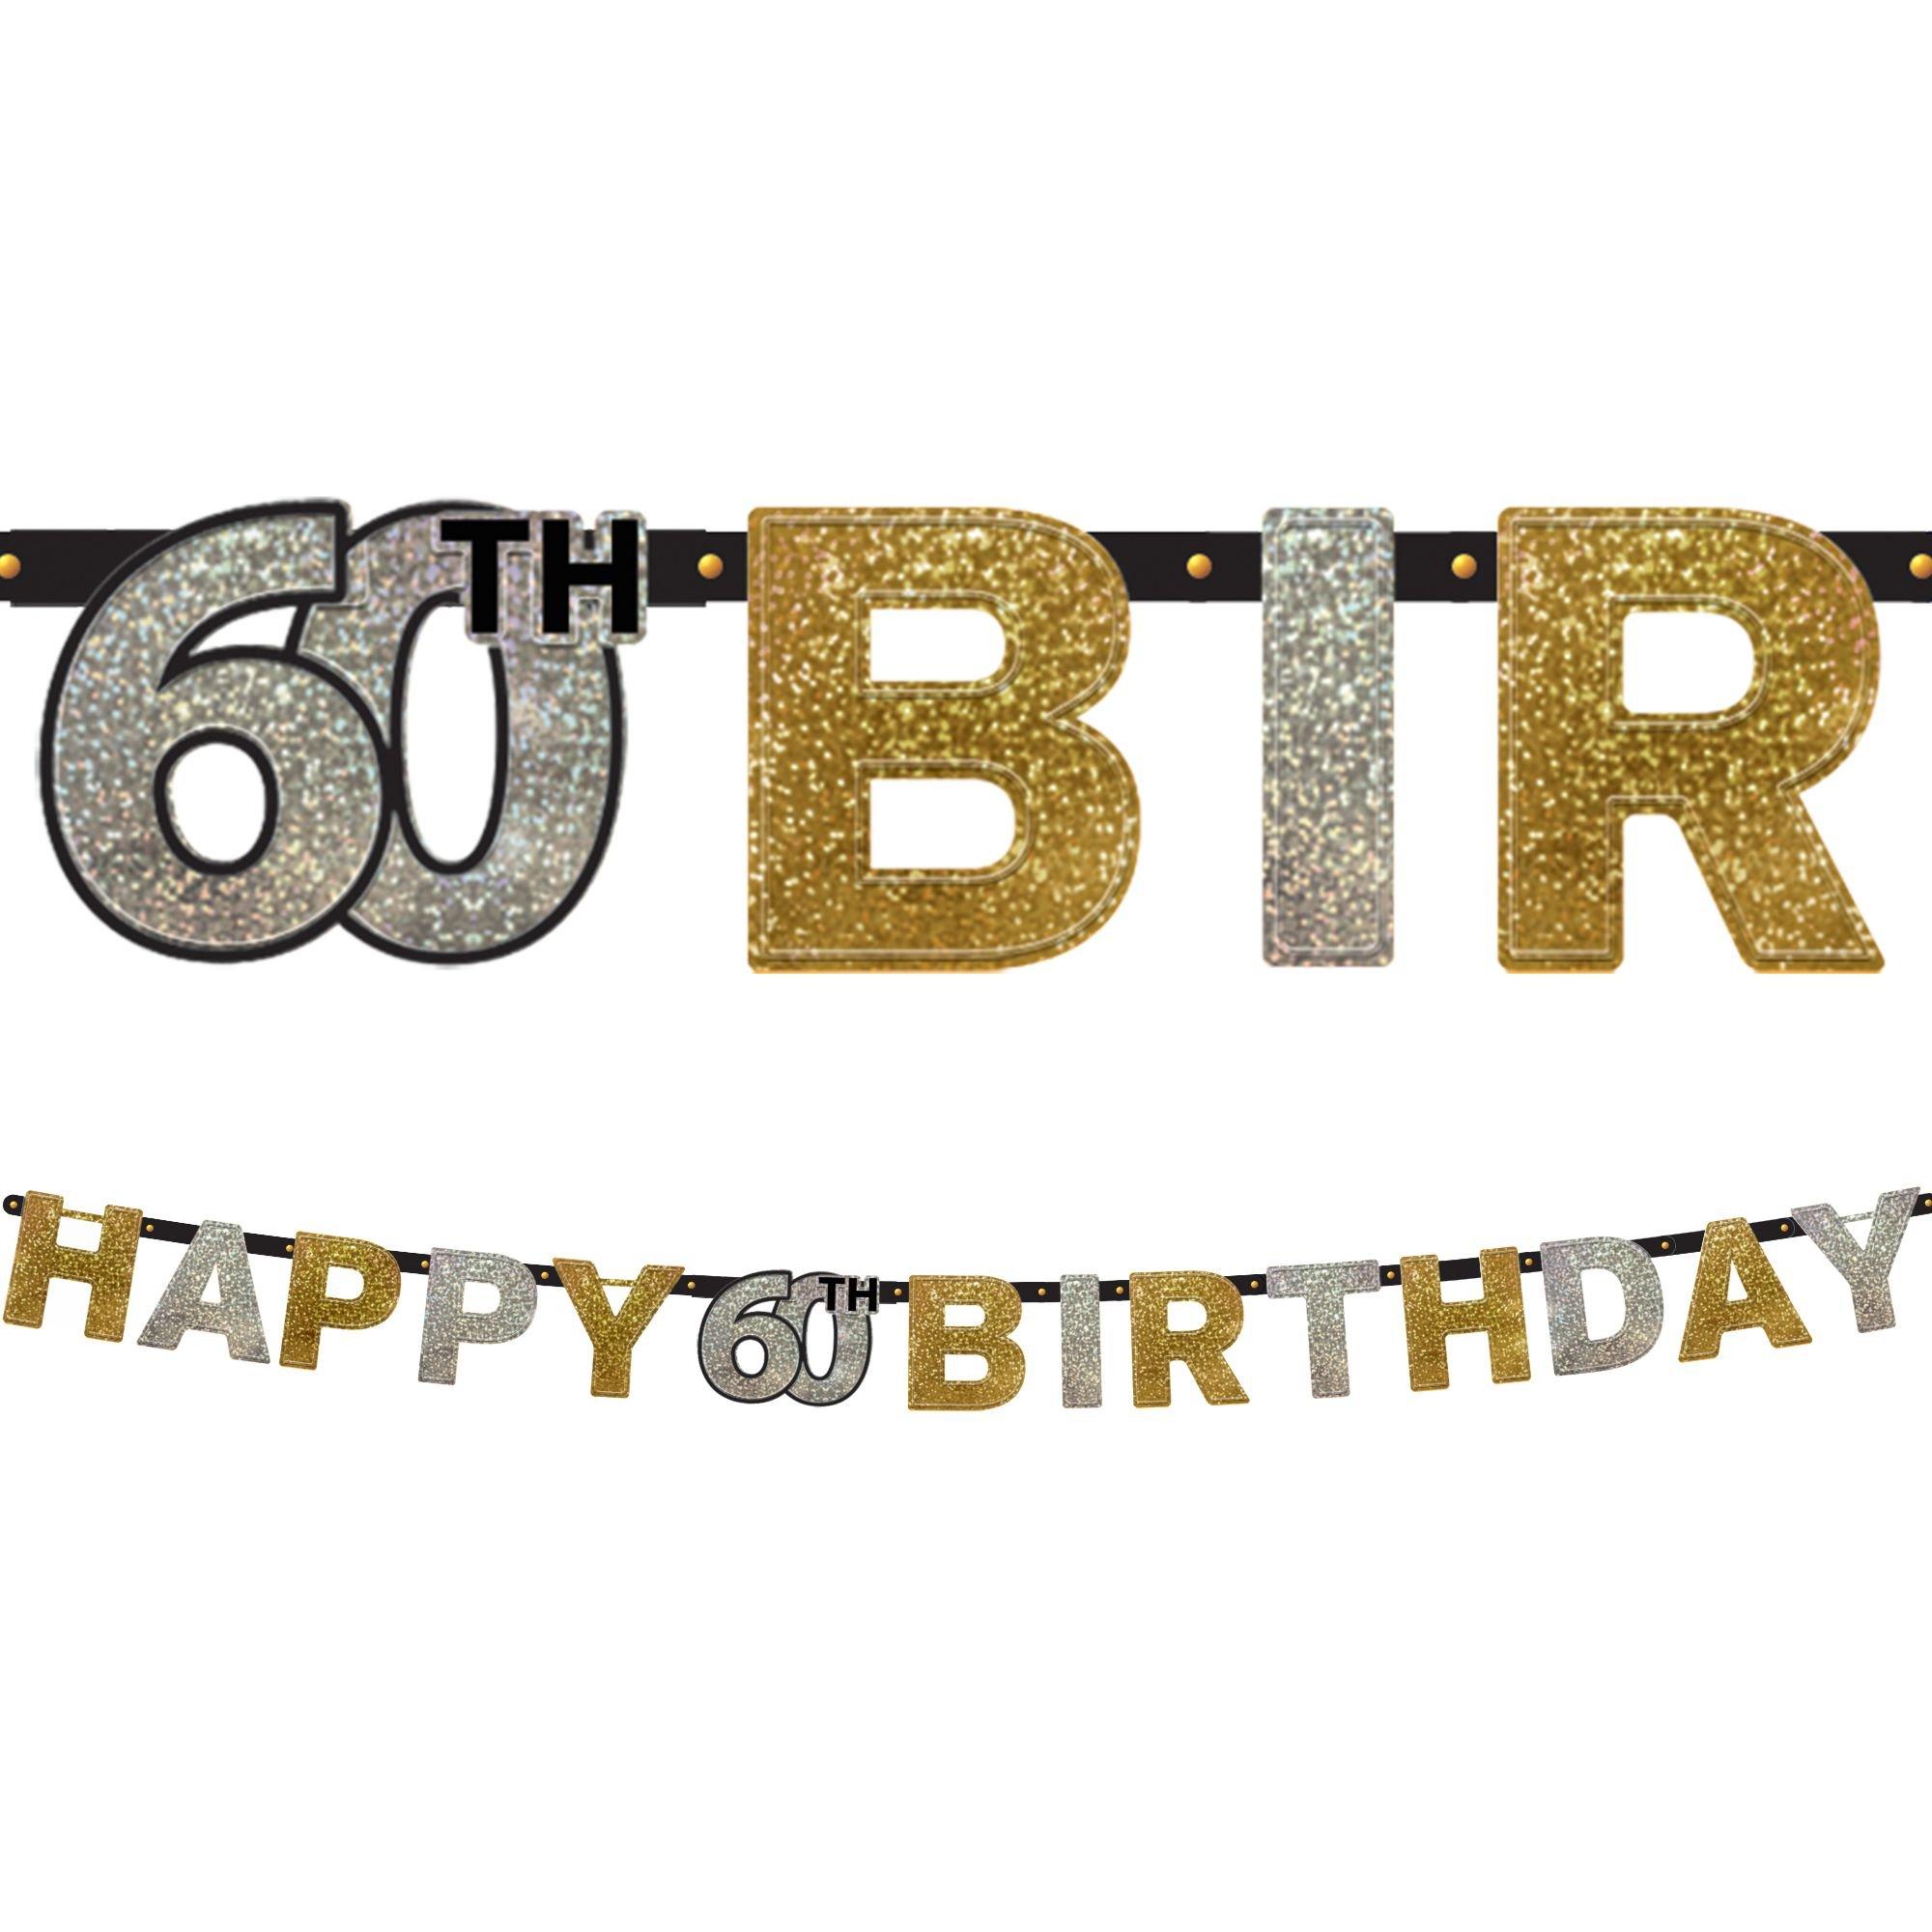 Prismatic 60th Birthday Banner 7ft - Sparkling Celebration | Party City